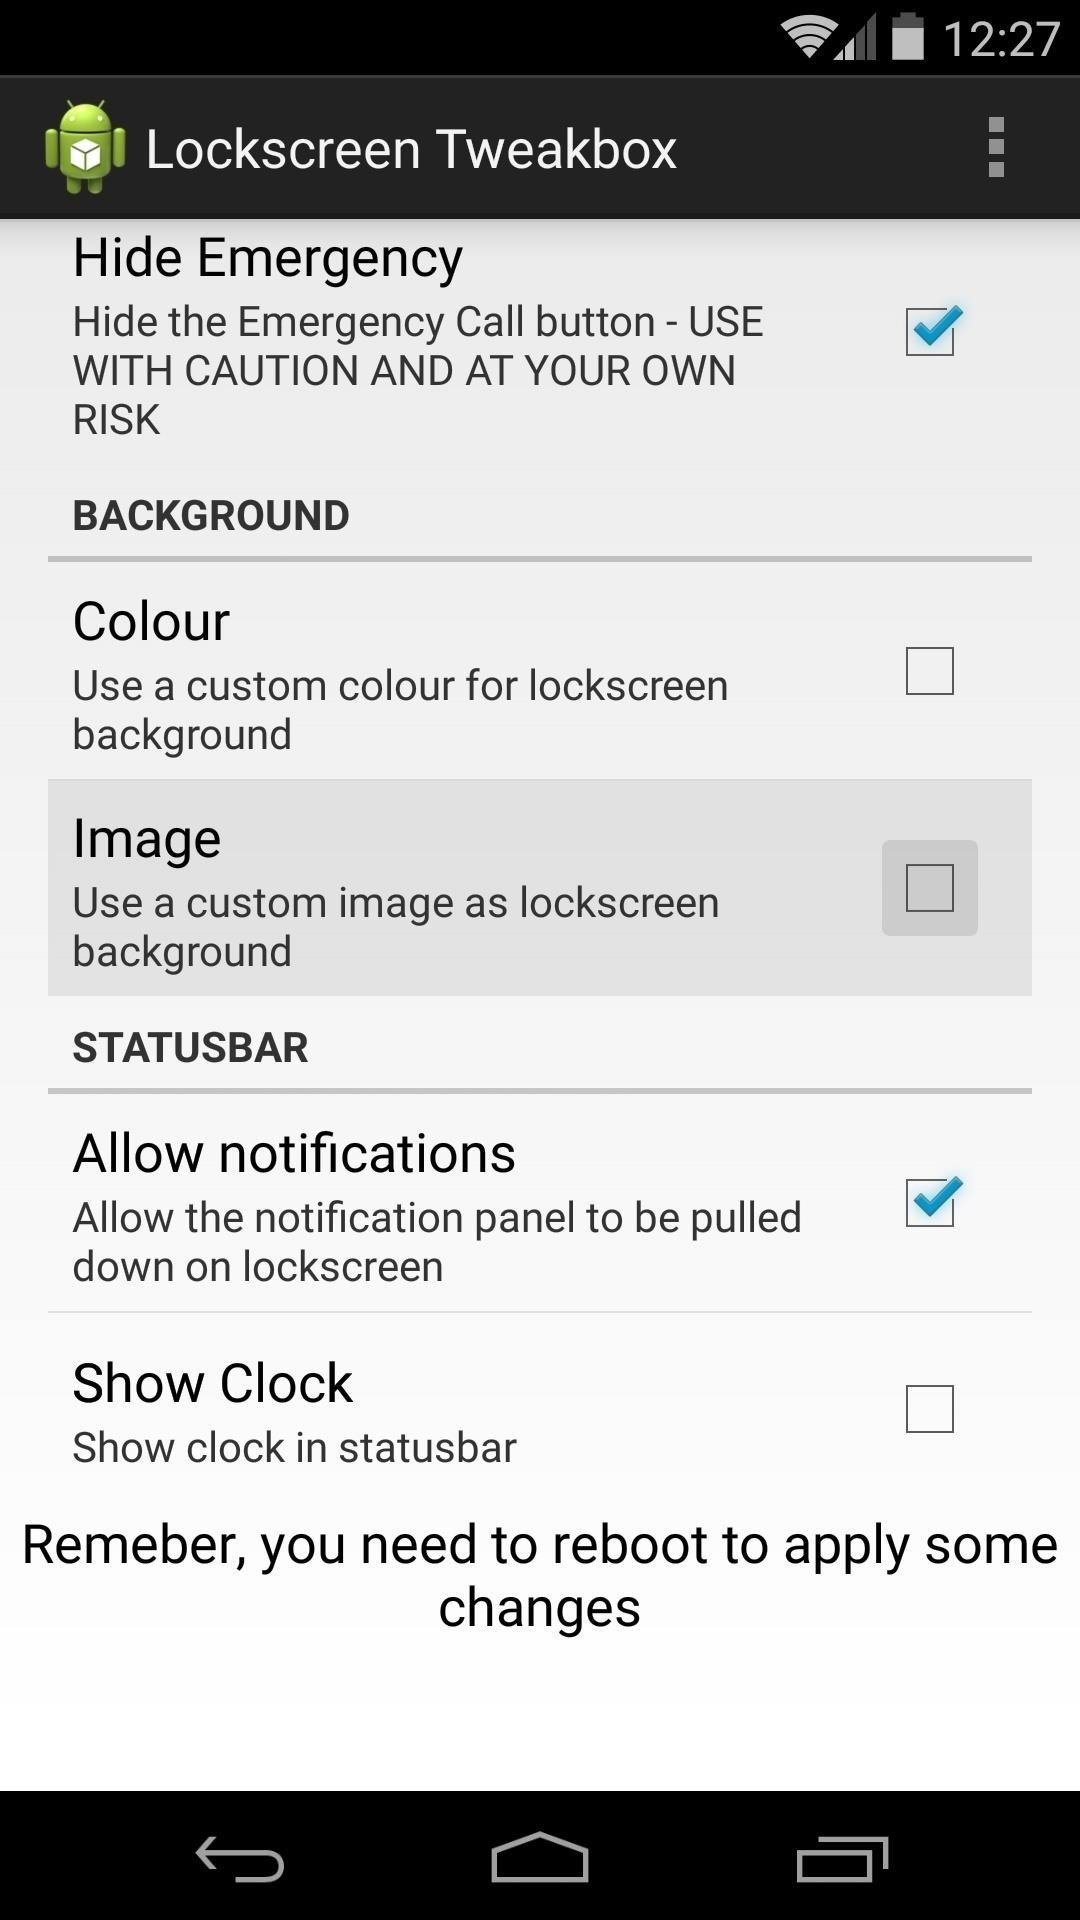 How to Add Functionality & Declutter the Android Lock Screen on Your Nexus 5